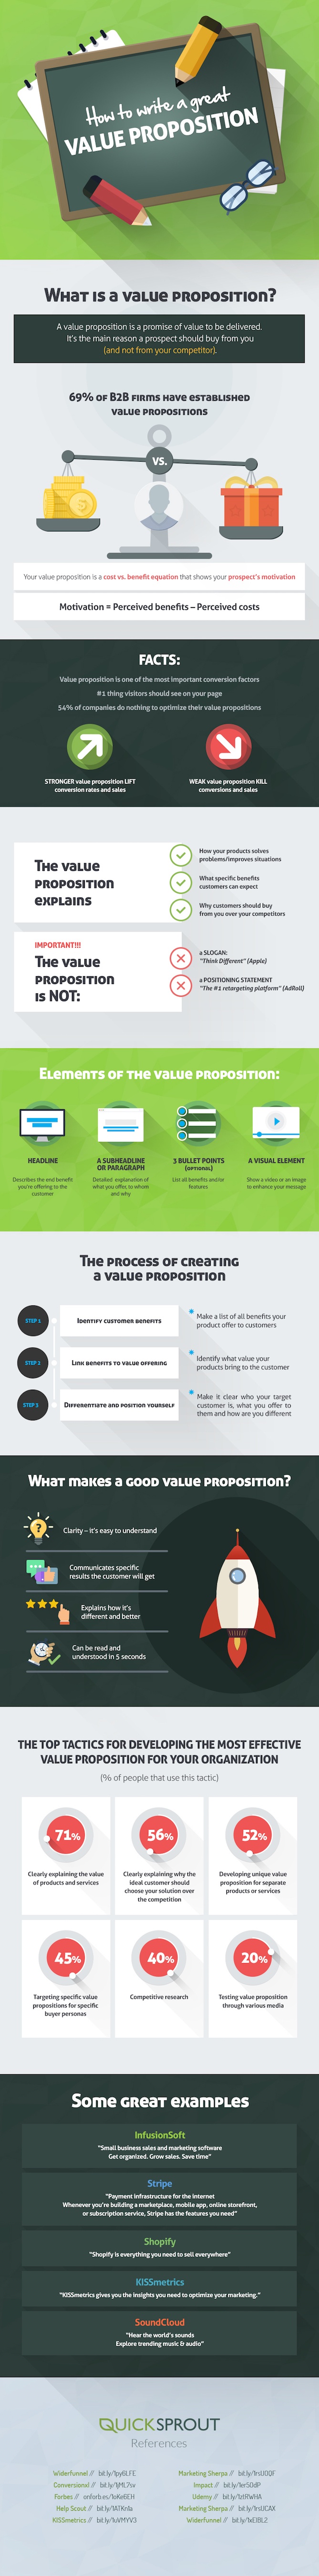 value-proposition-infographic